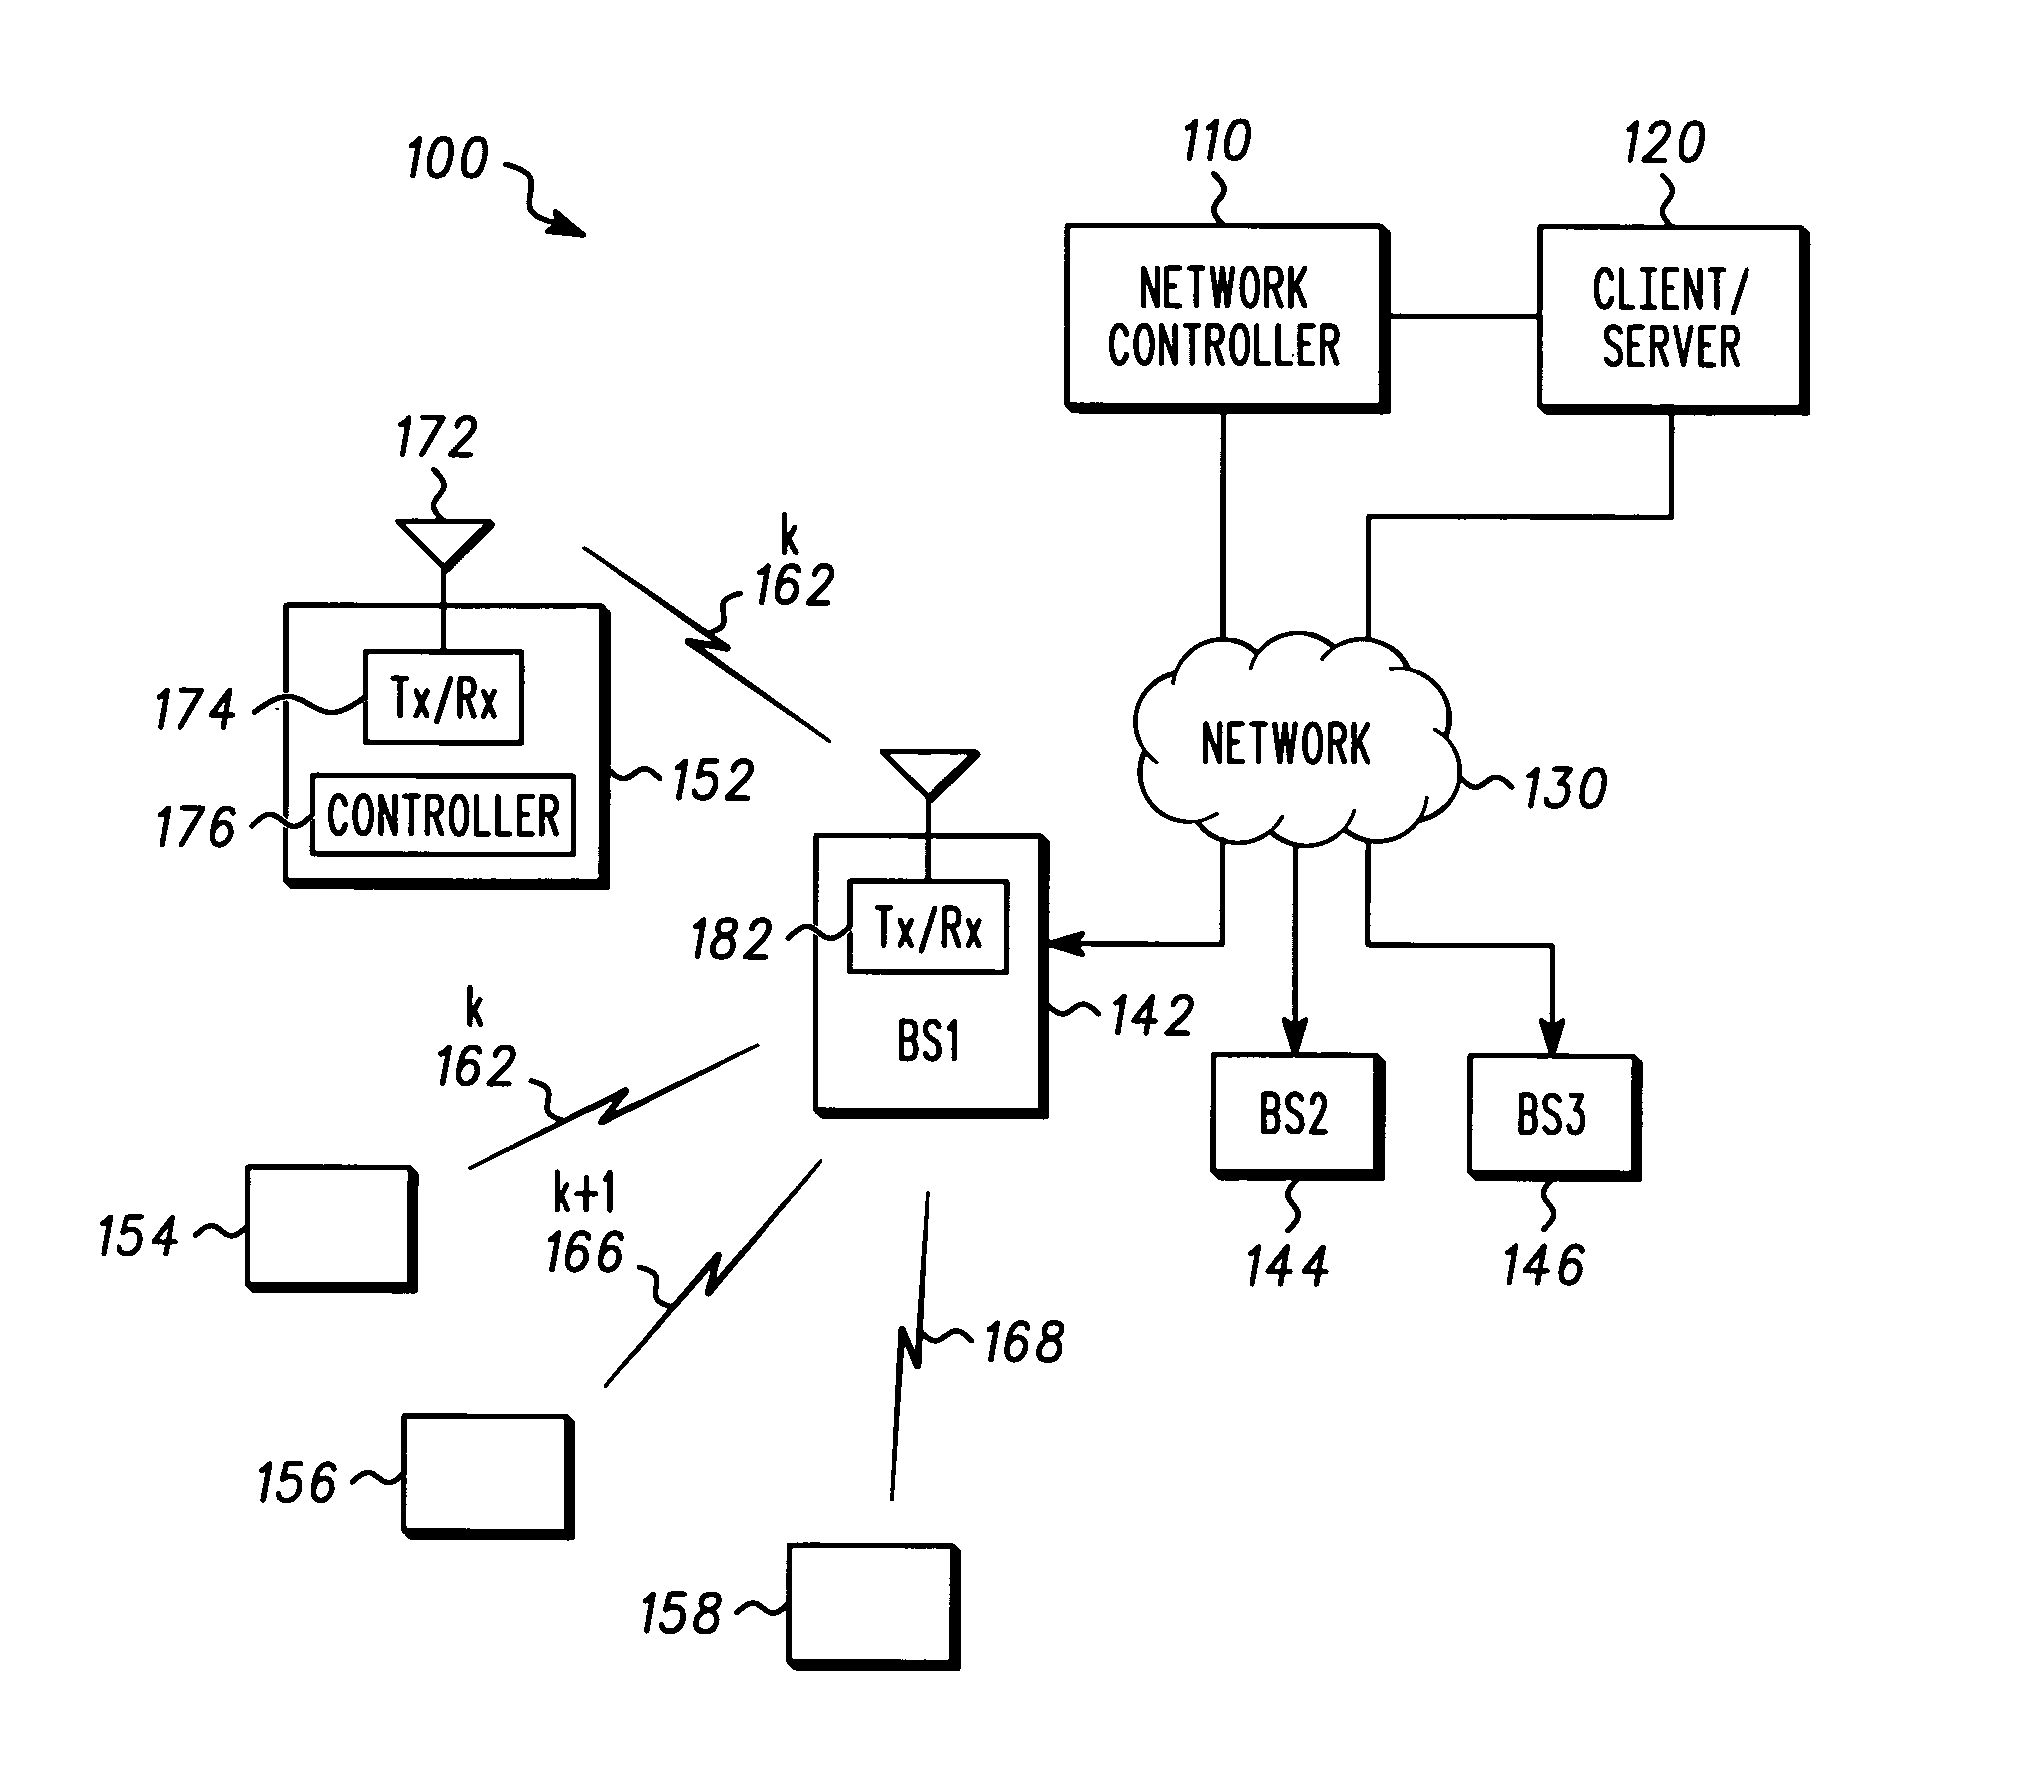 Apparatus and method for adaptive broadcast transmission